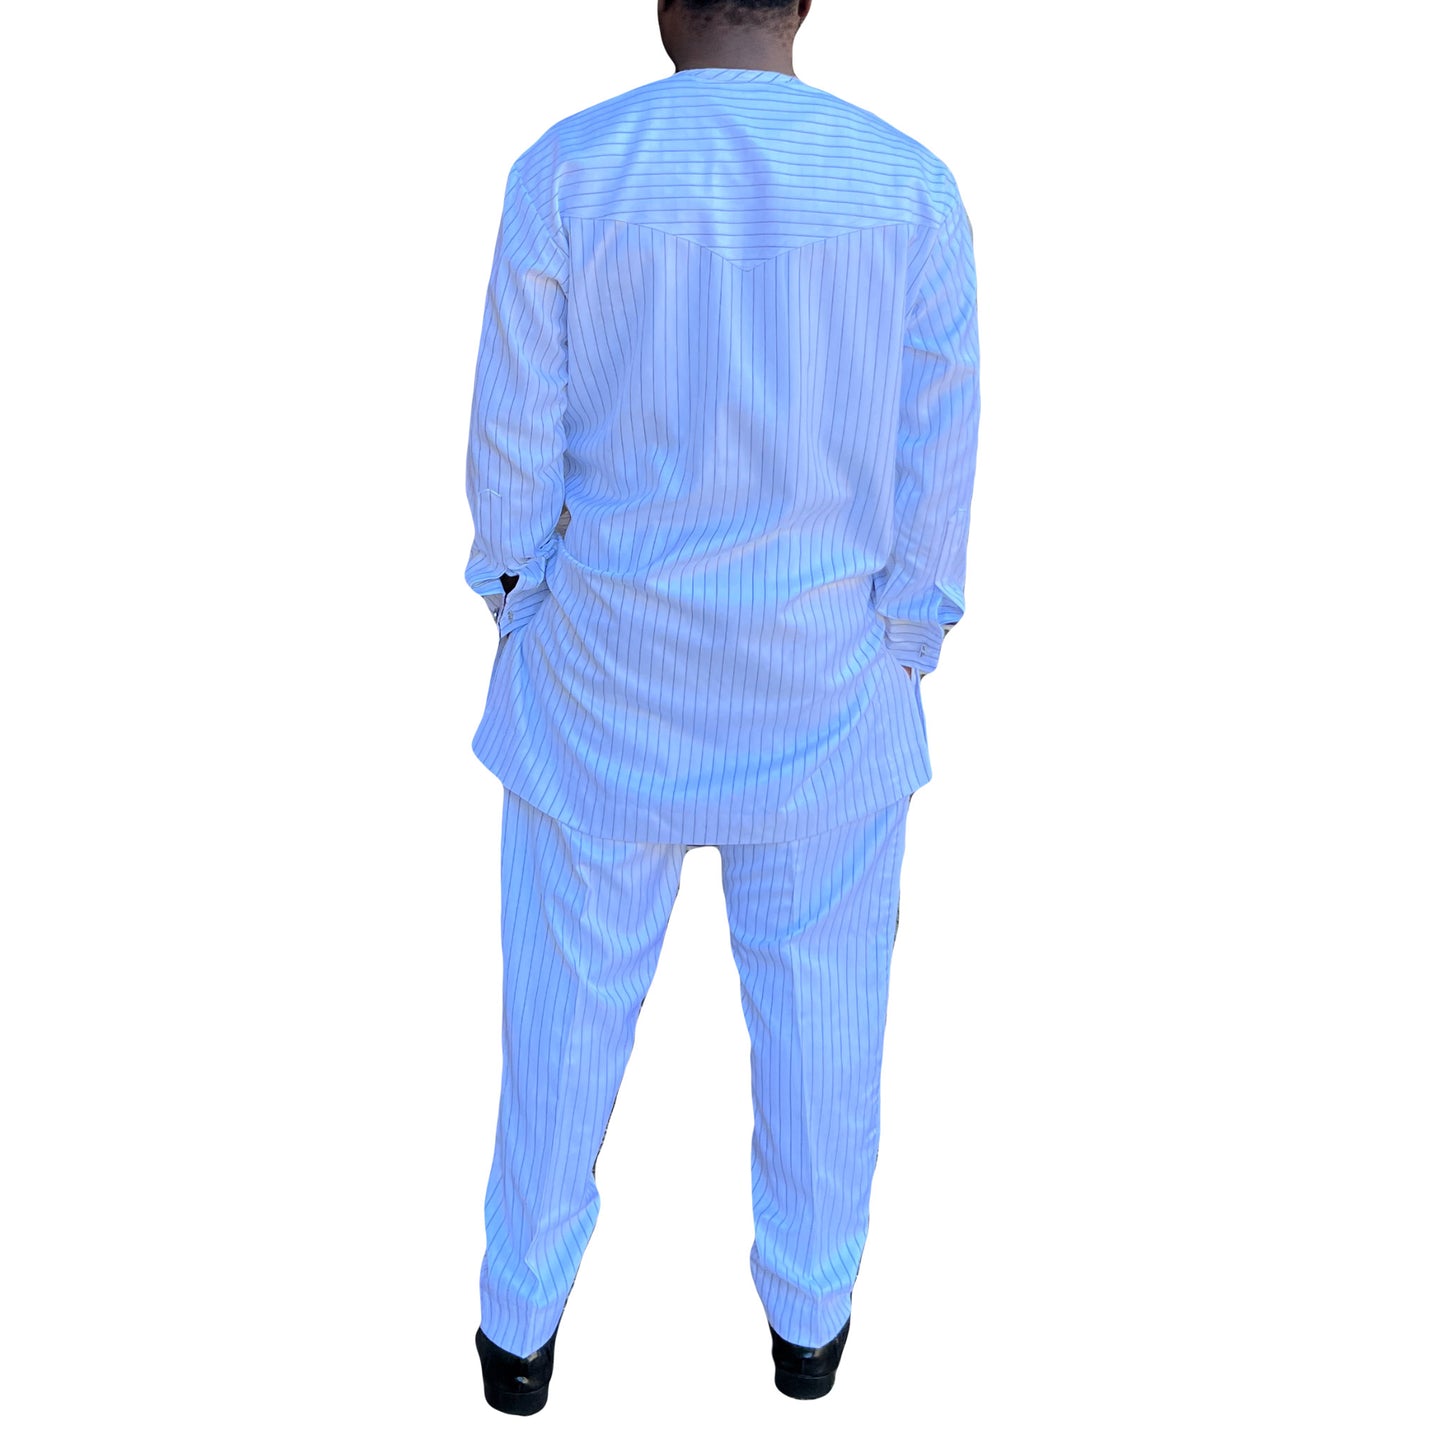 African Men's Formal White strped Clothes, Two Piece Suit Traditional Long Sleeve Nigerian Senator's Outfits